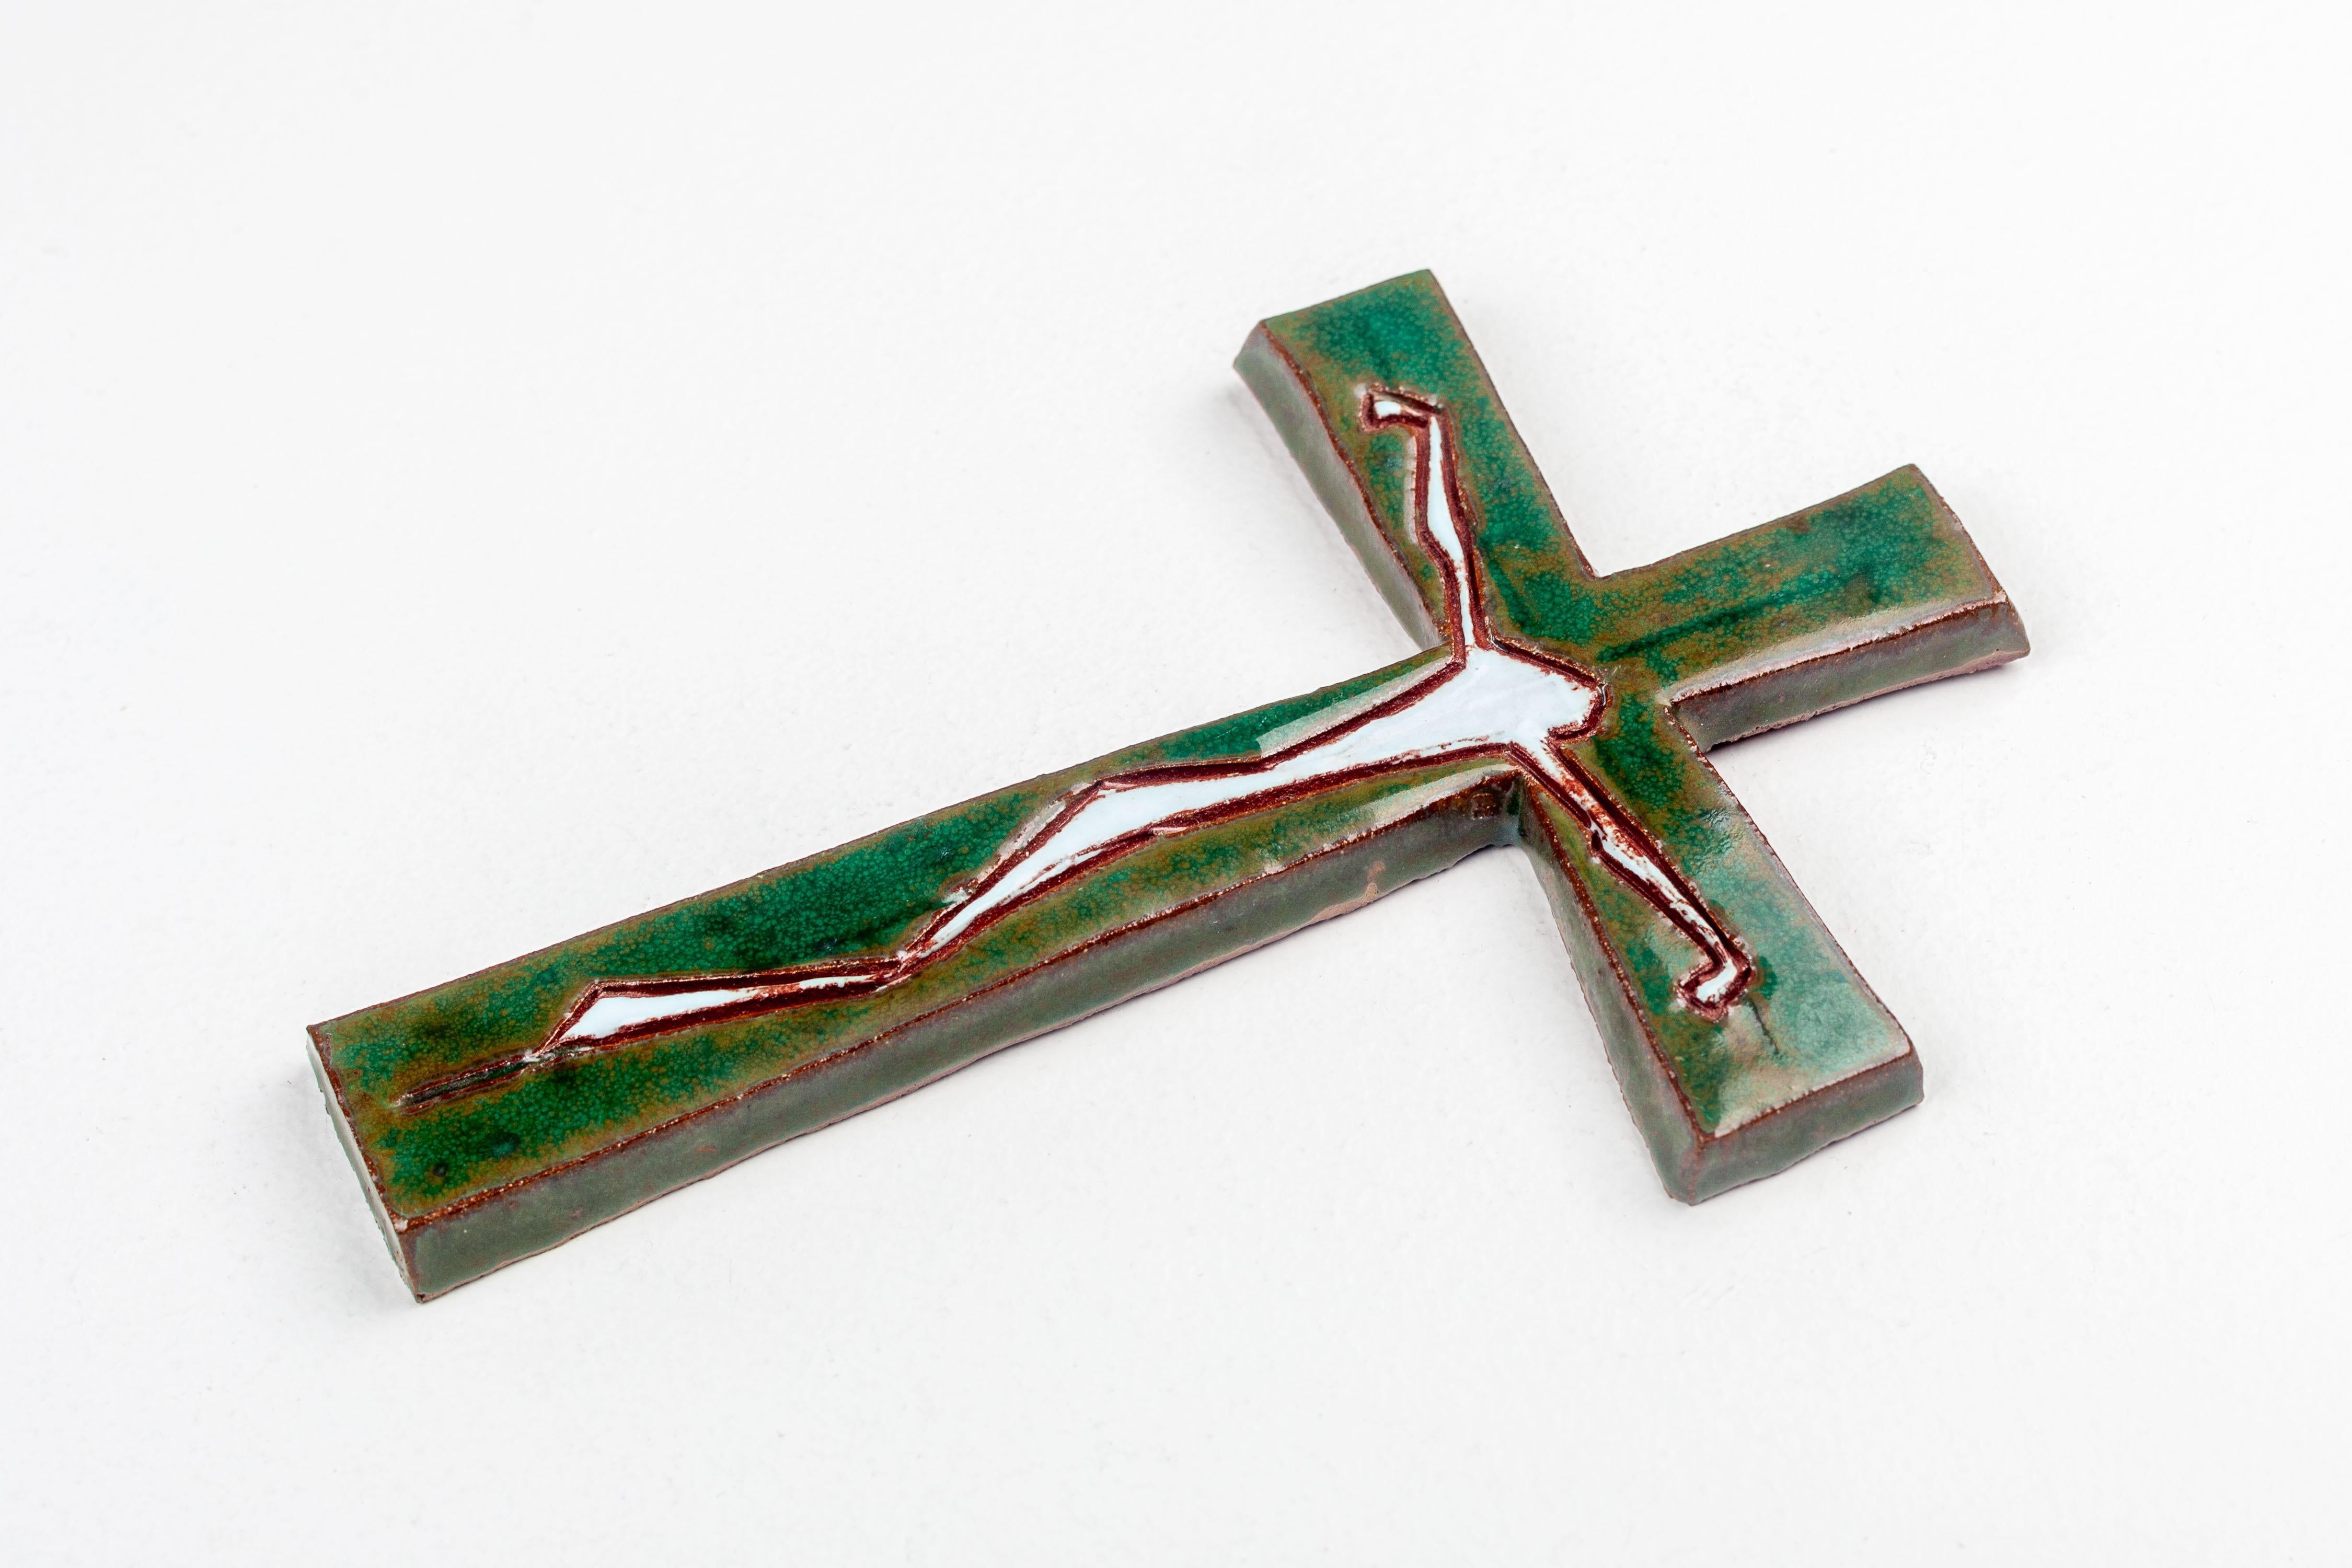 Midcentury Modern Wall Cross - Greens & White, Handmade Studio Pottery In Good Condition For Sale In Chicago, IL